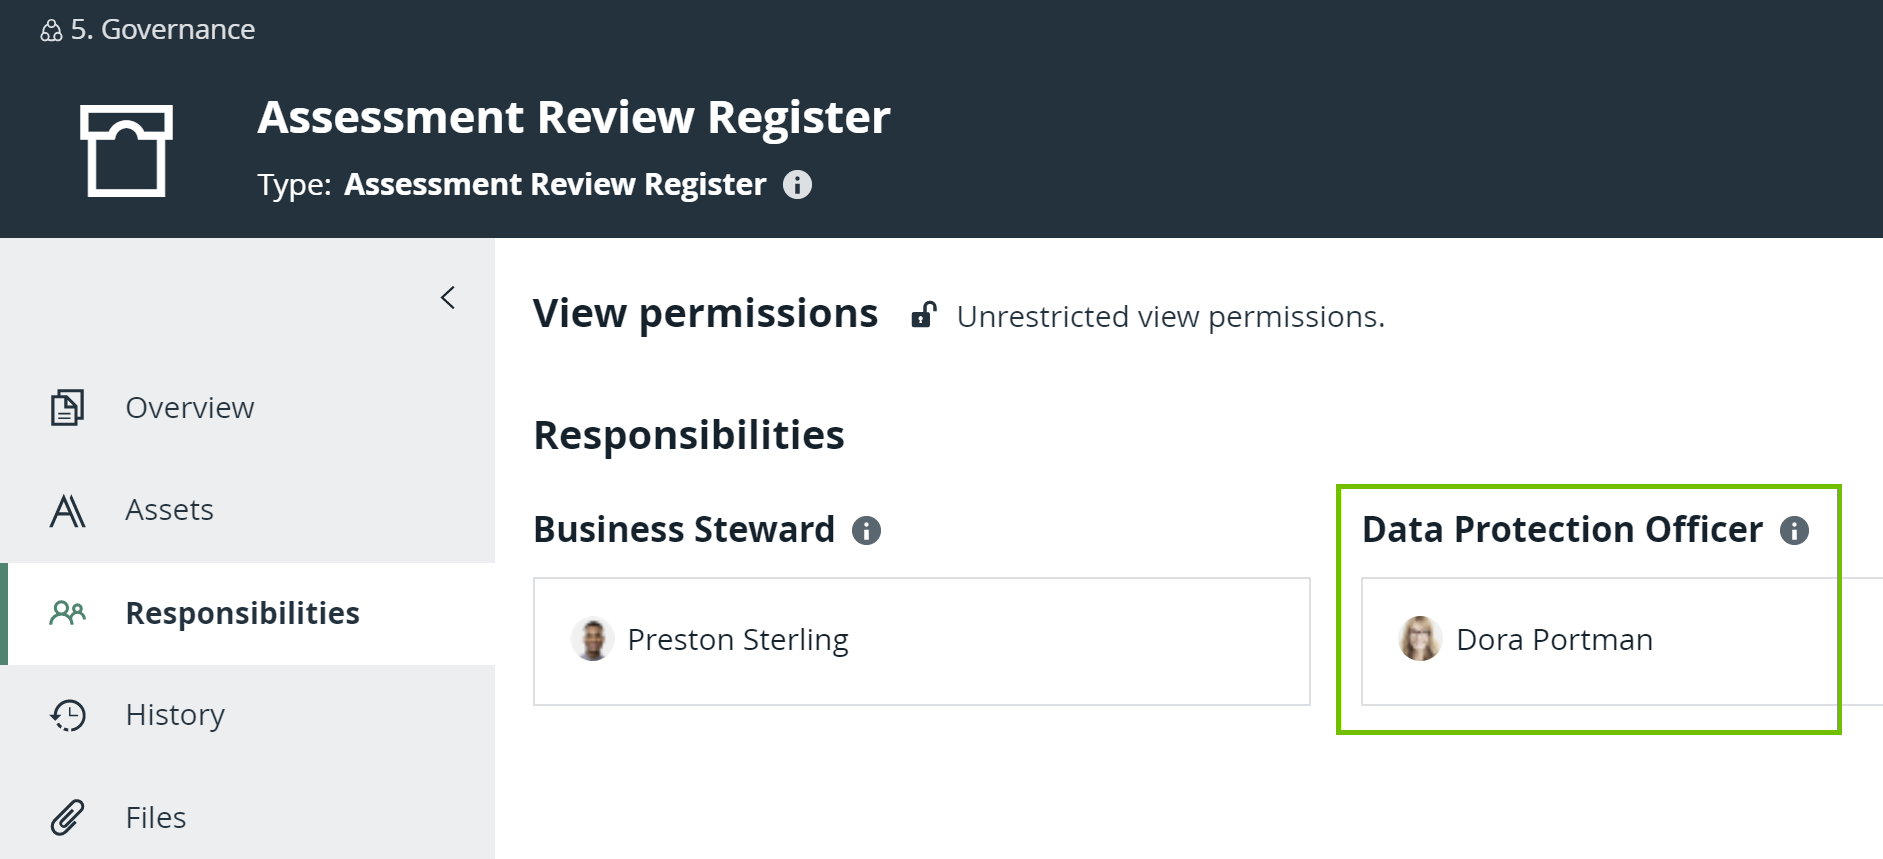 Responsibilities tab of the Assessment Review Register domain